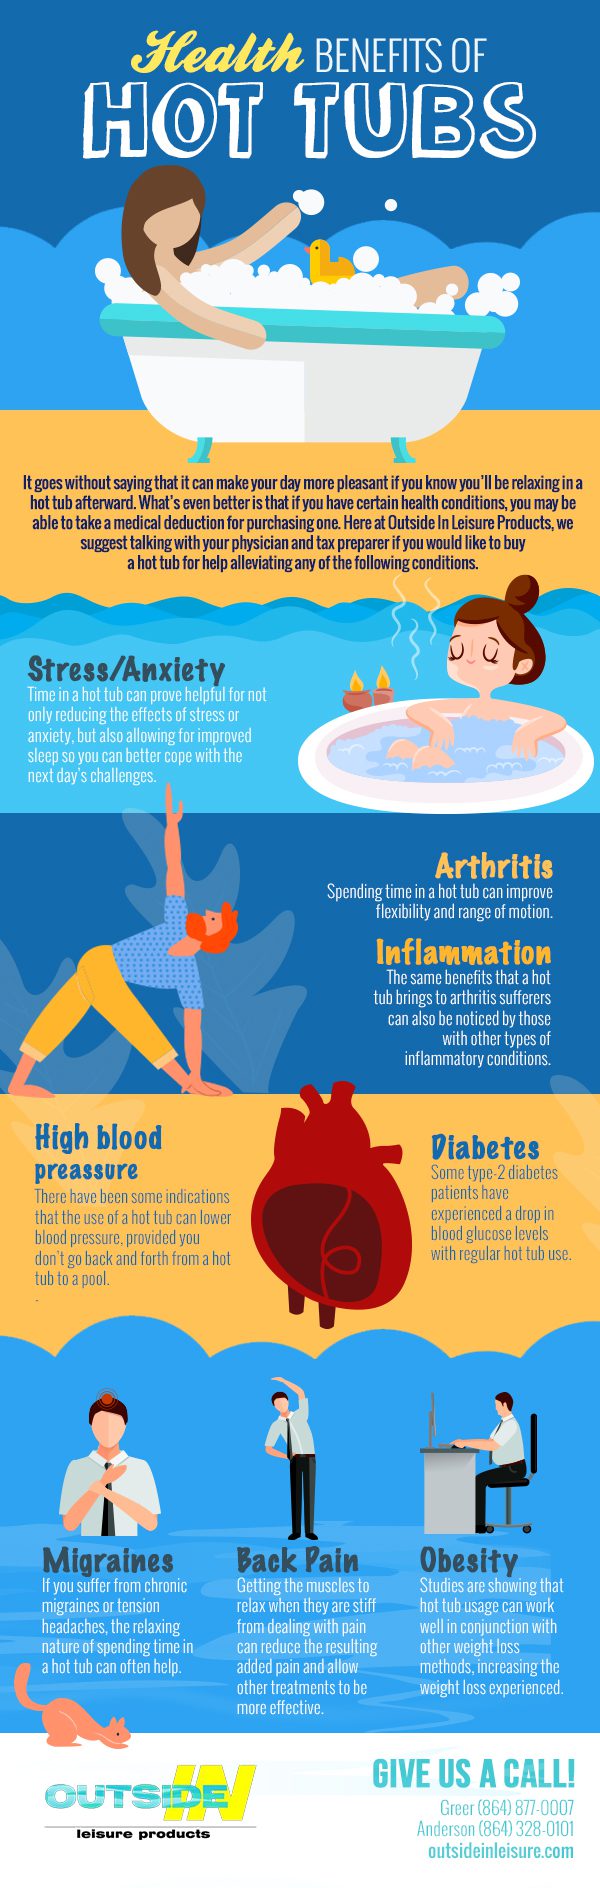 Health Benefits of Hot Tubs [Infographic]